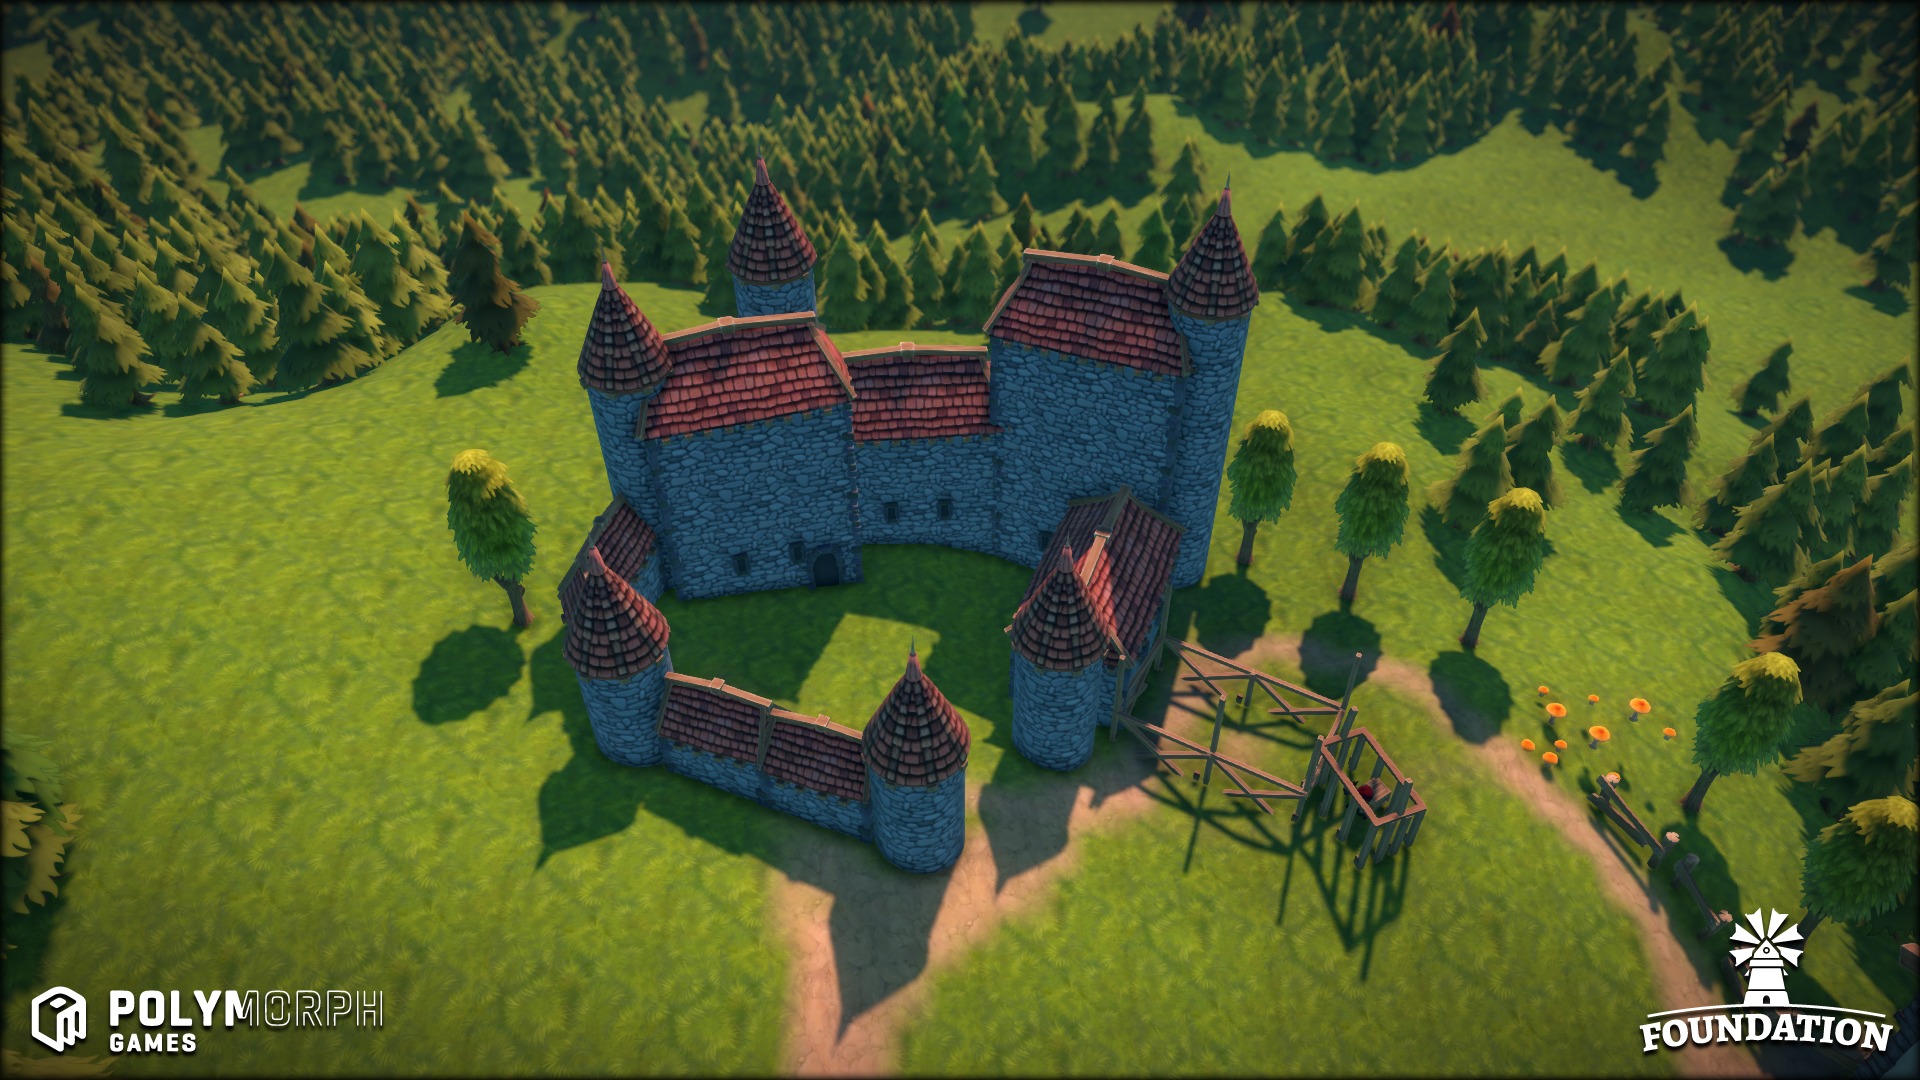 Early Access To The Medieval City-Building Simulation Game, Foundation, Is Now Available